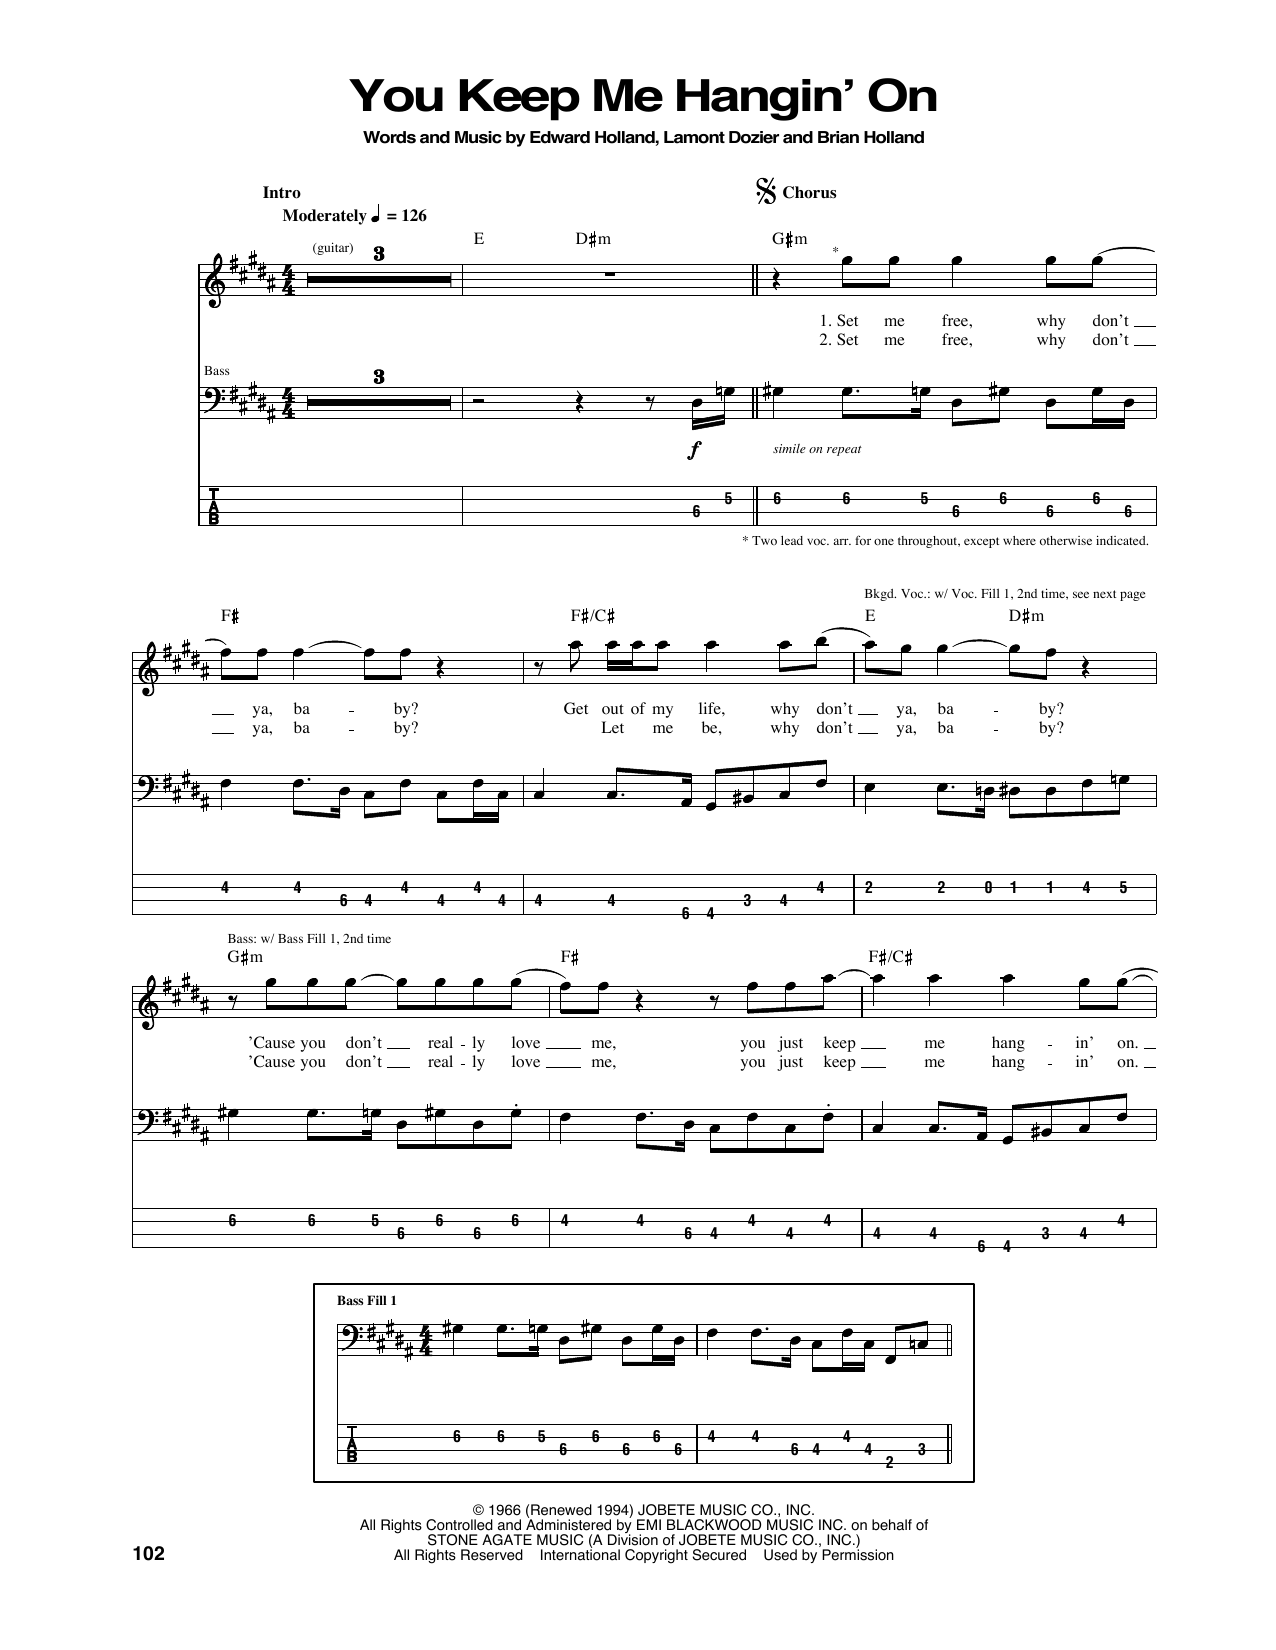 Download The Supremes You Keep Me Hangin' On Sheet Music